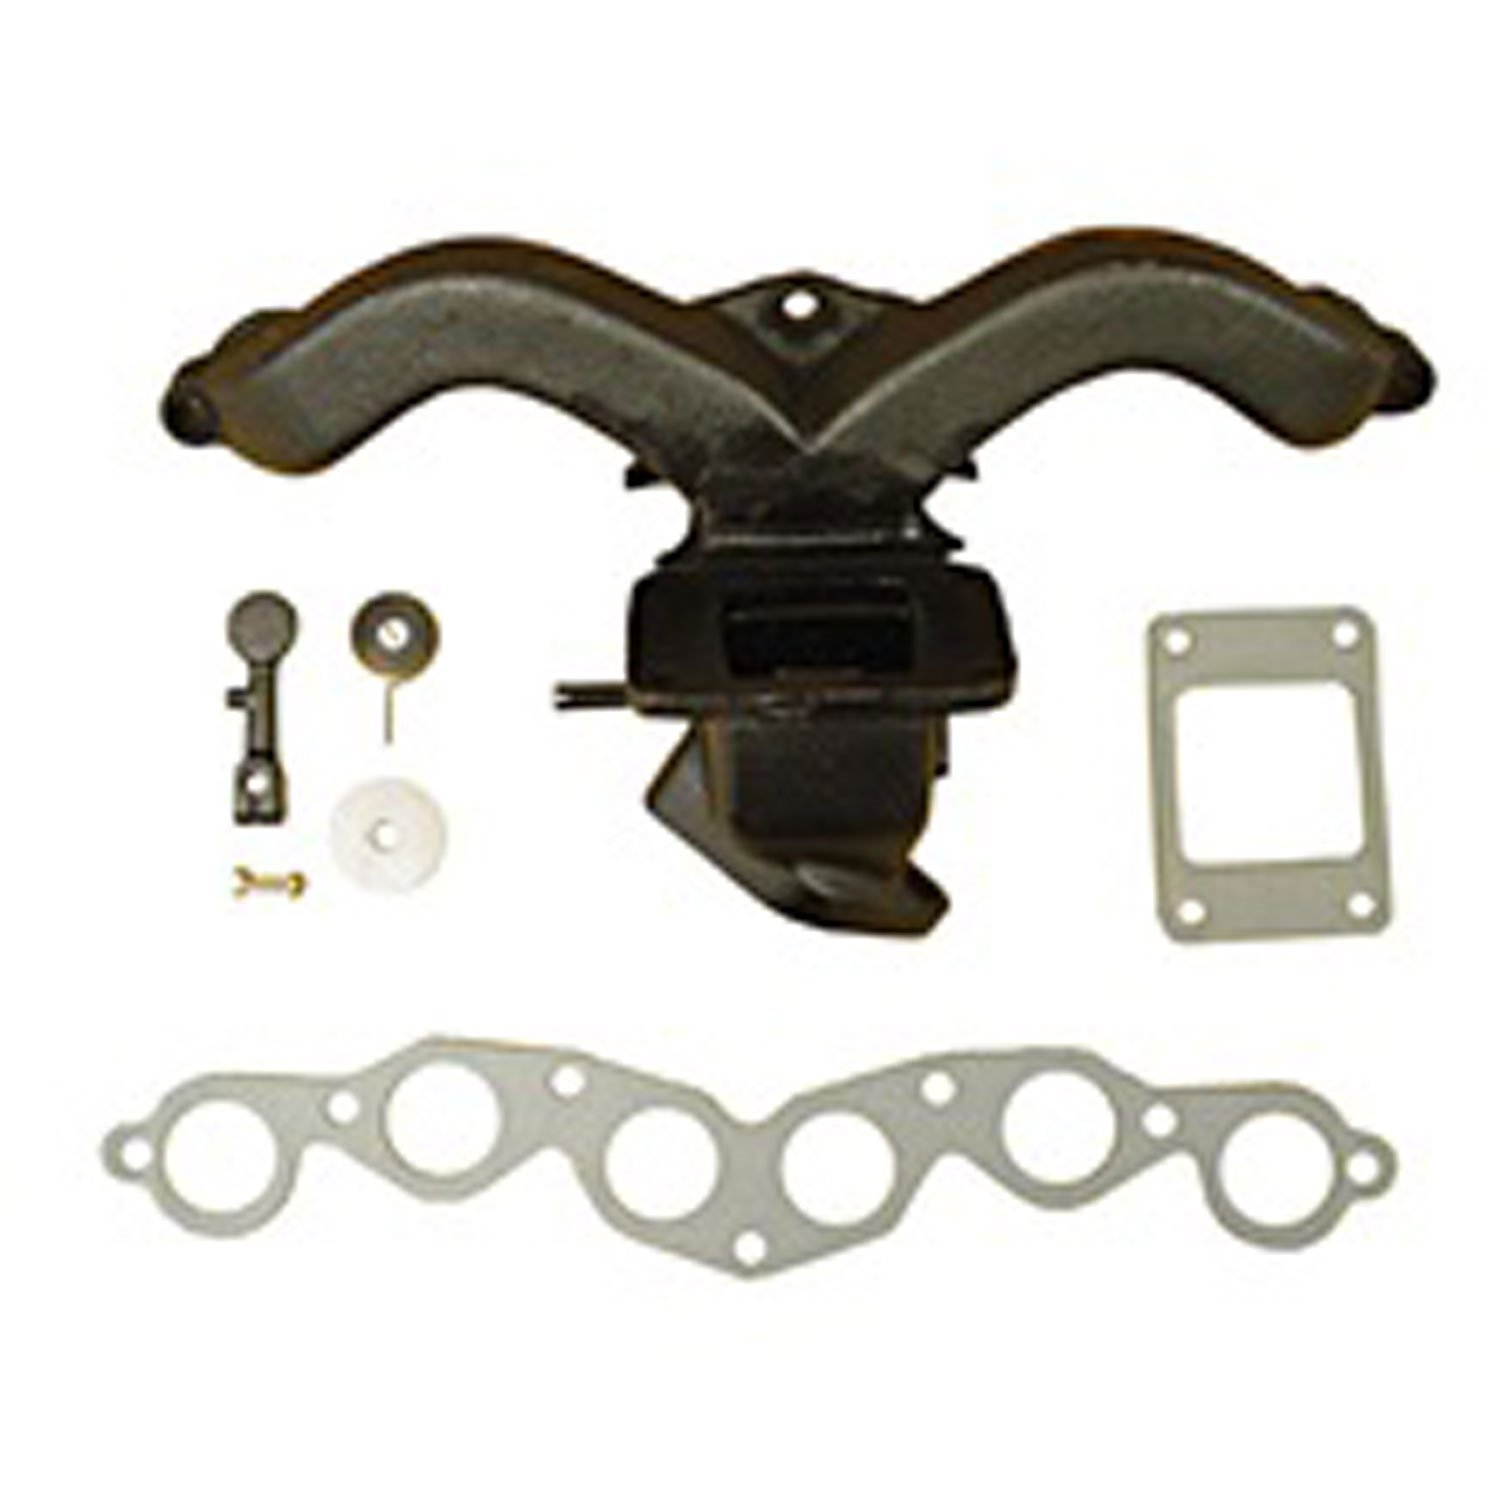 This exhaust manifold kit from Omix-ADA fits 41-53